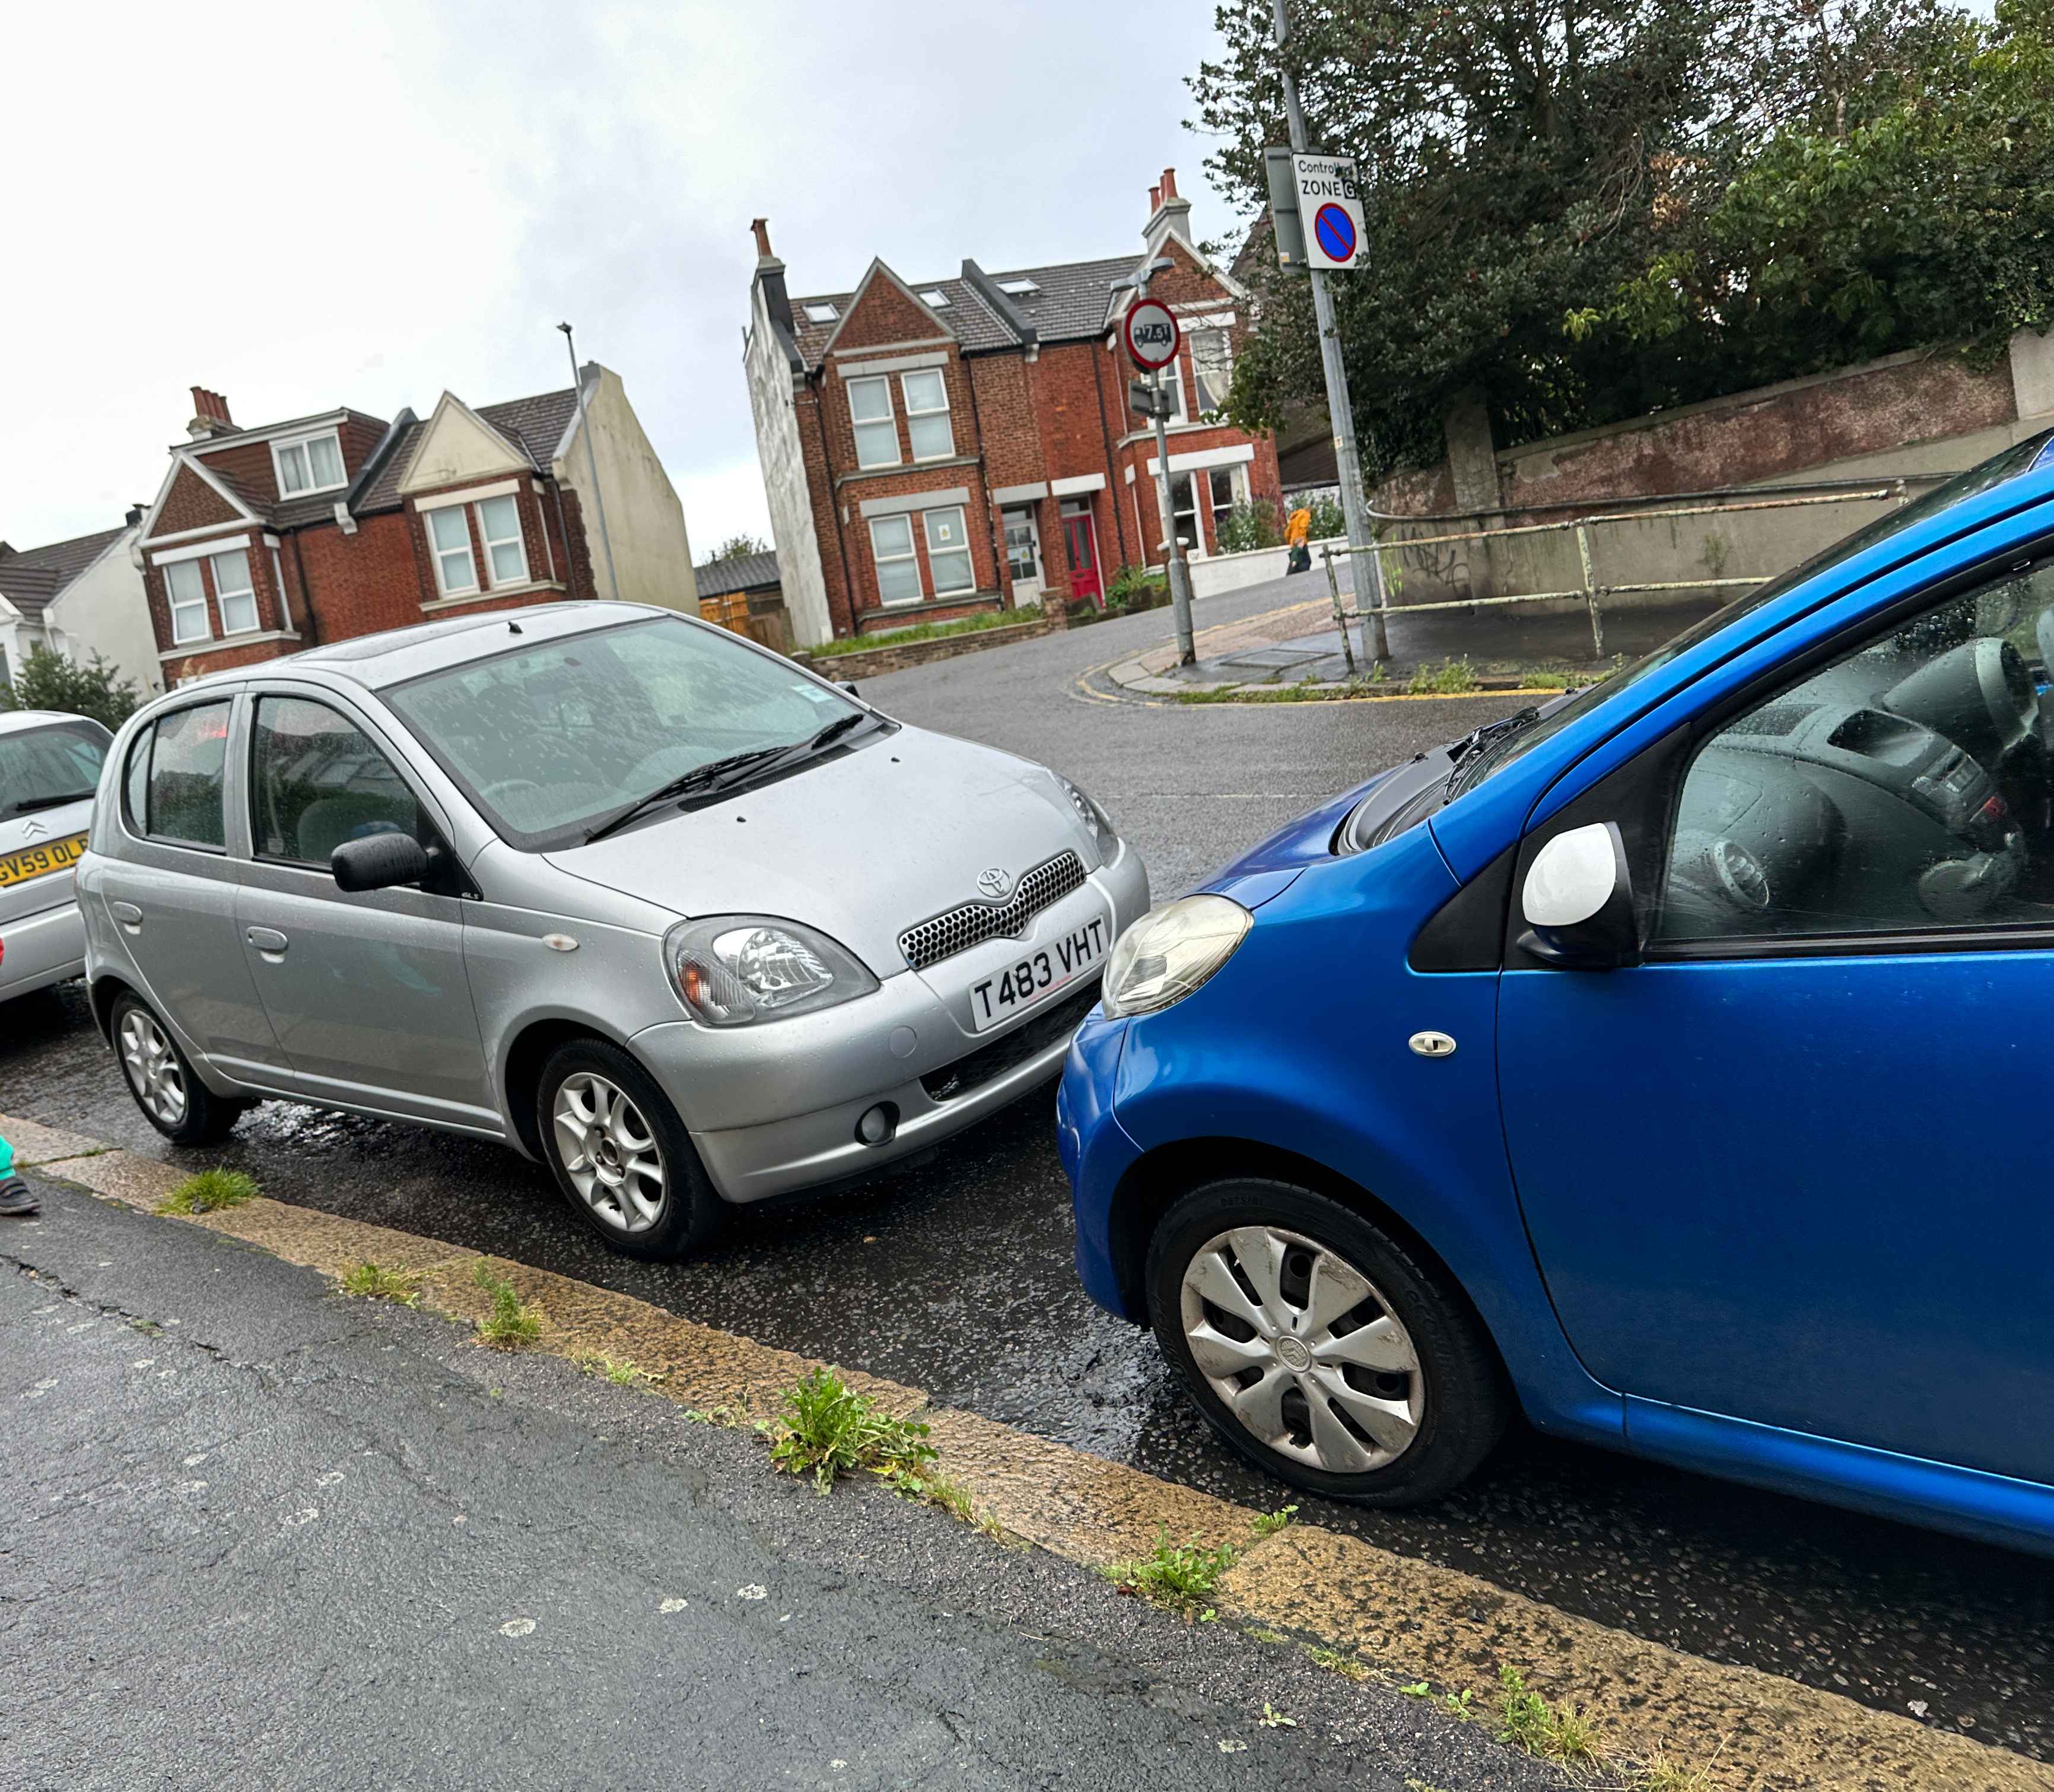 Photograph of T483 VHT - a Silver Toyota Yaris parked in Hollingdean by a non-resident. The second of fourteen photographs supplied by the residents of Hollingdean.